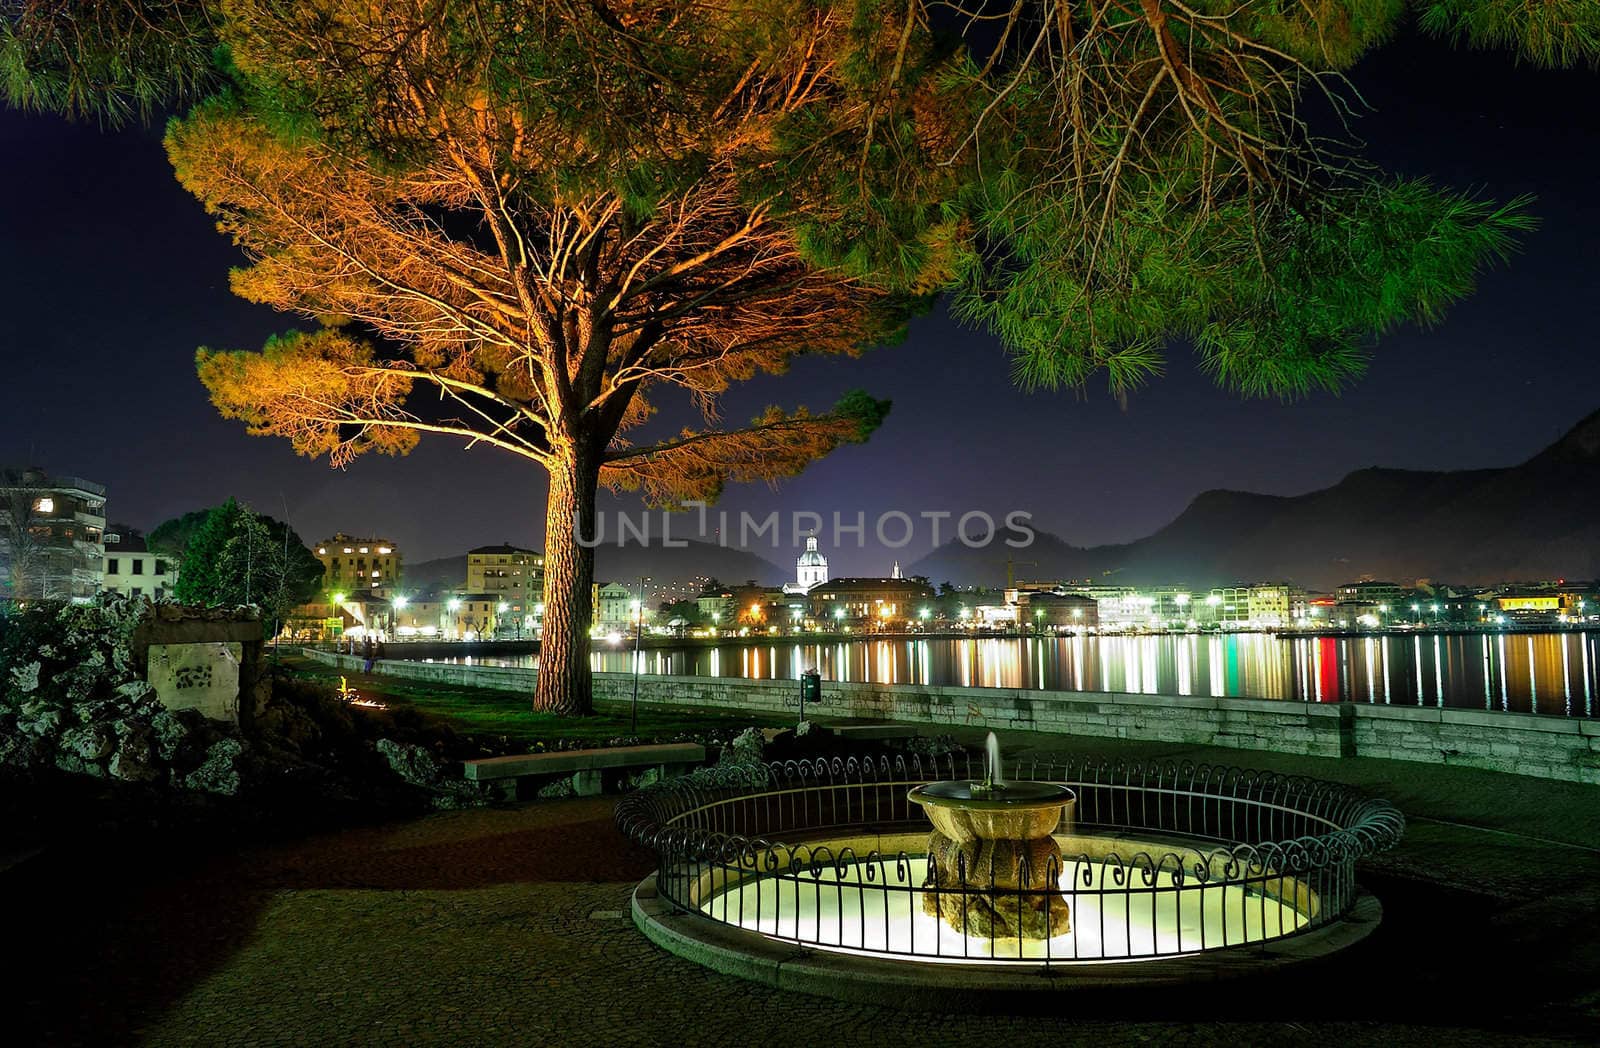 Lakeside city at nigh with illuminated fountain in foreground - Como Italy